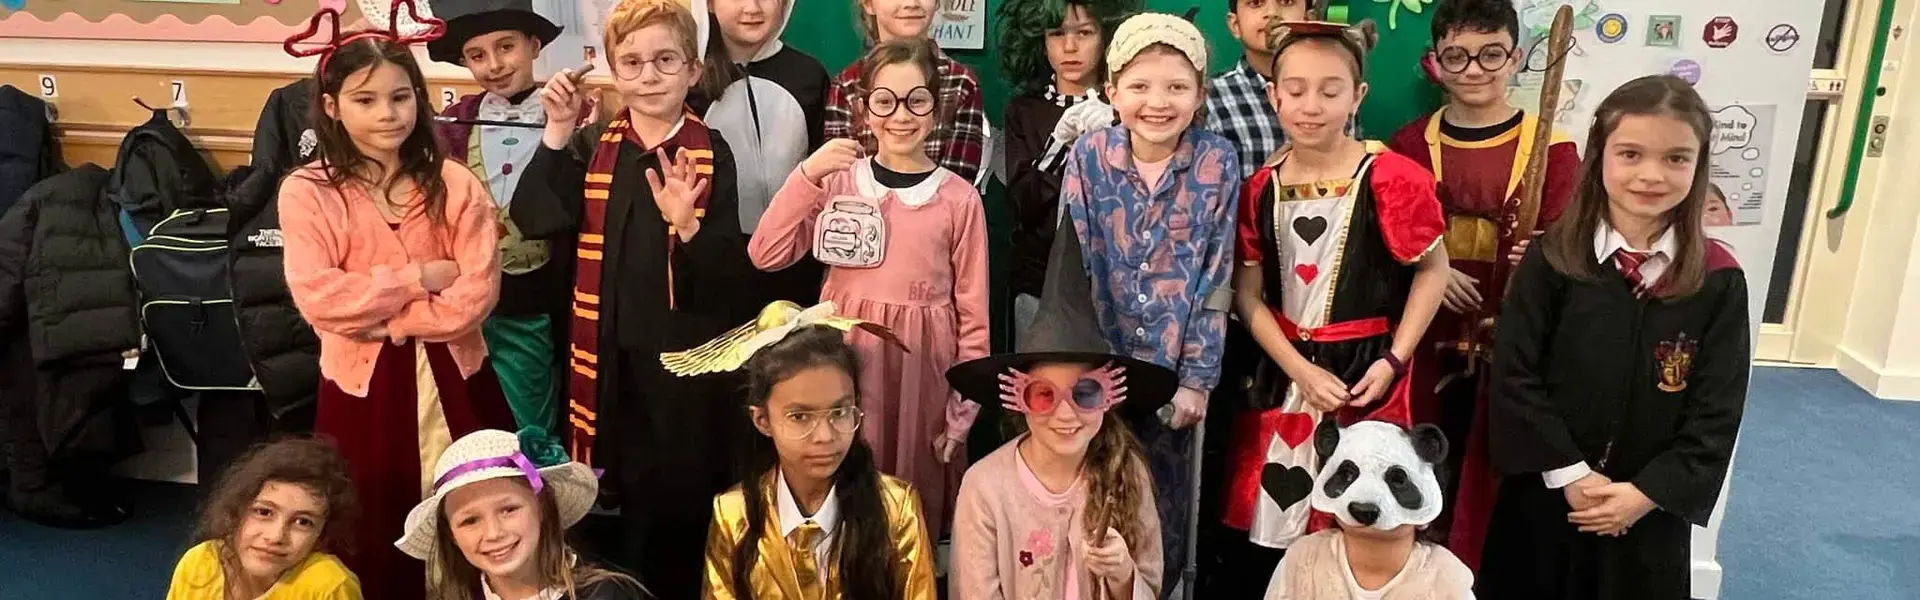 Pupils dressed up for world book day at Ibstock Place School, Roehampton, a private school near Richmond, Barnes, Putney, Kingston, & Wandsworth